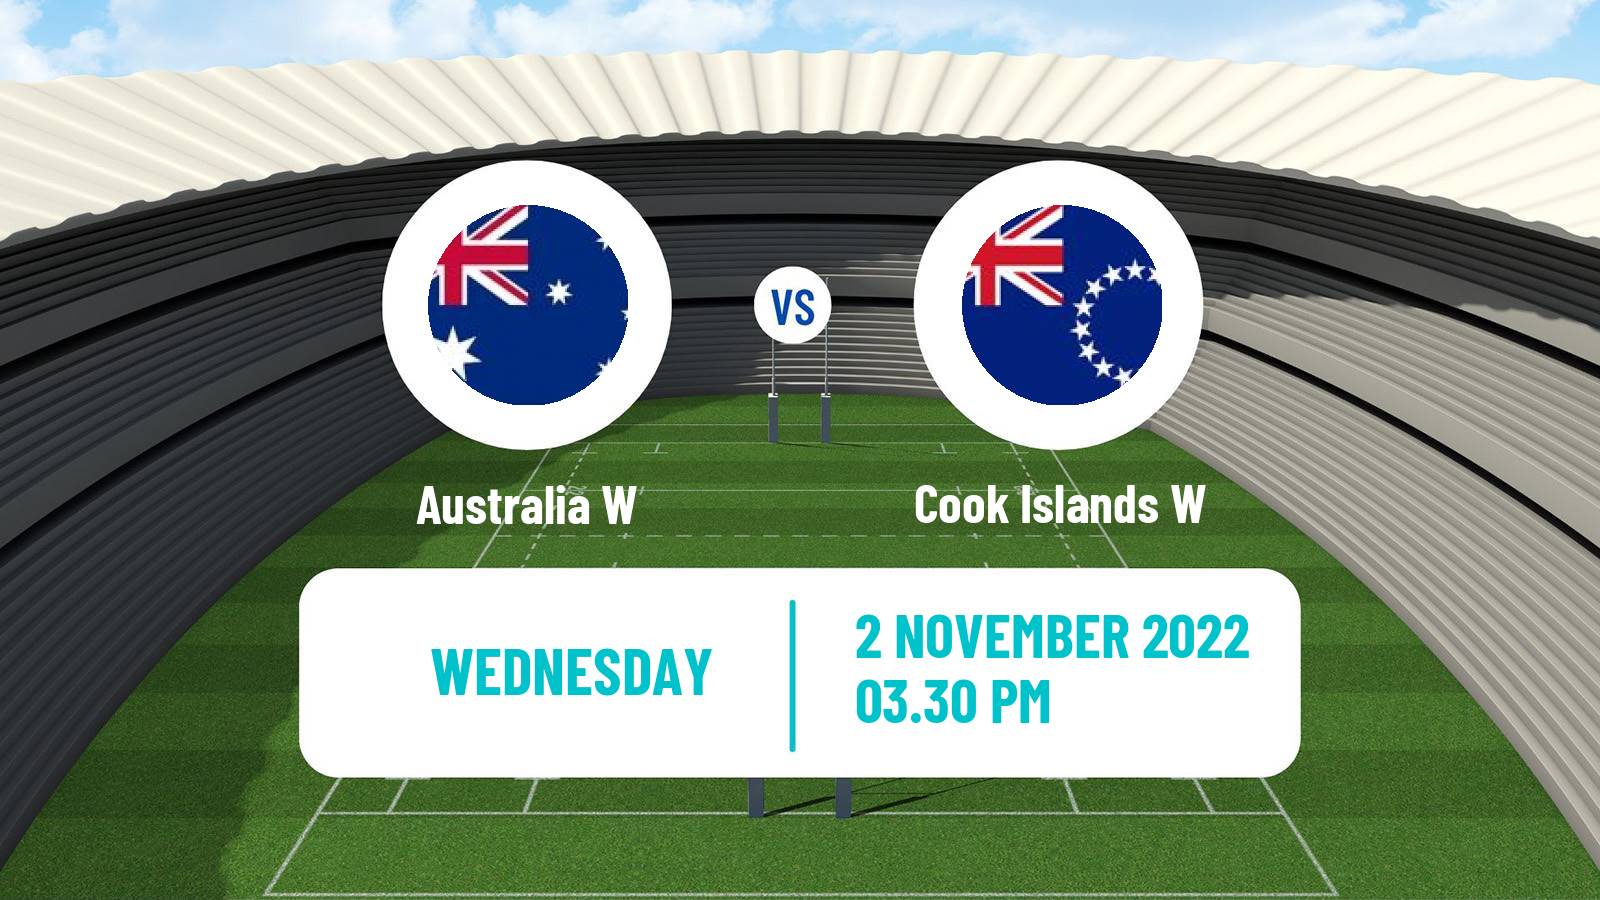 Rugby league World Cup Rugby League Women Australia W - Cook Islands W